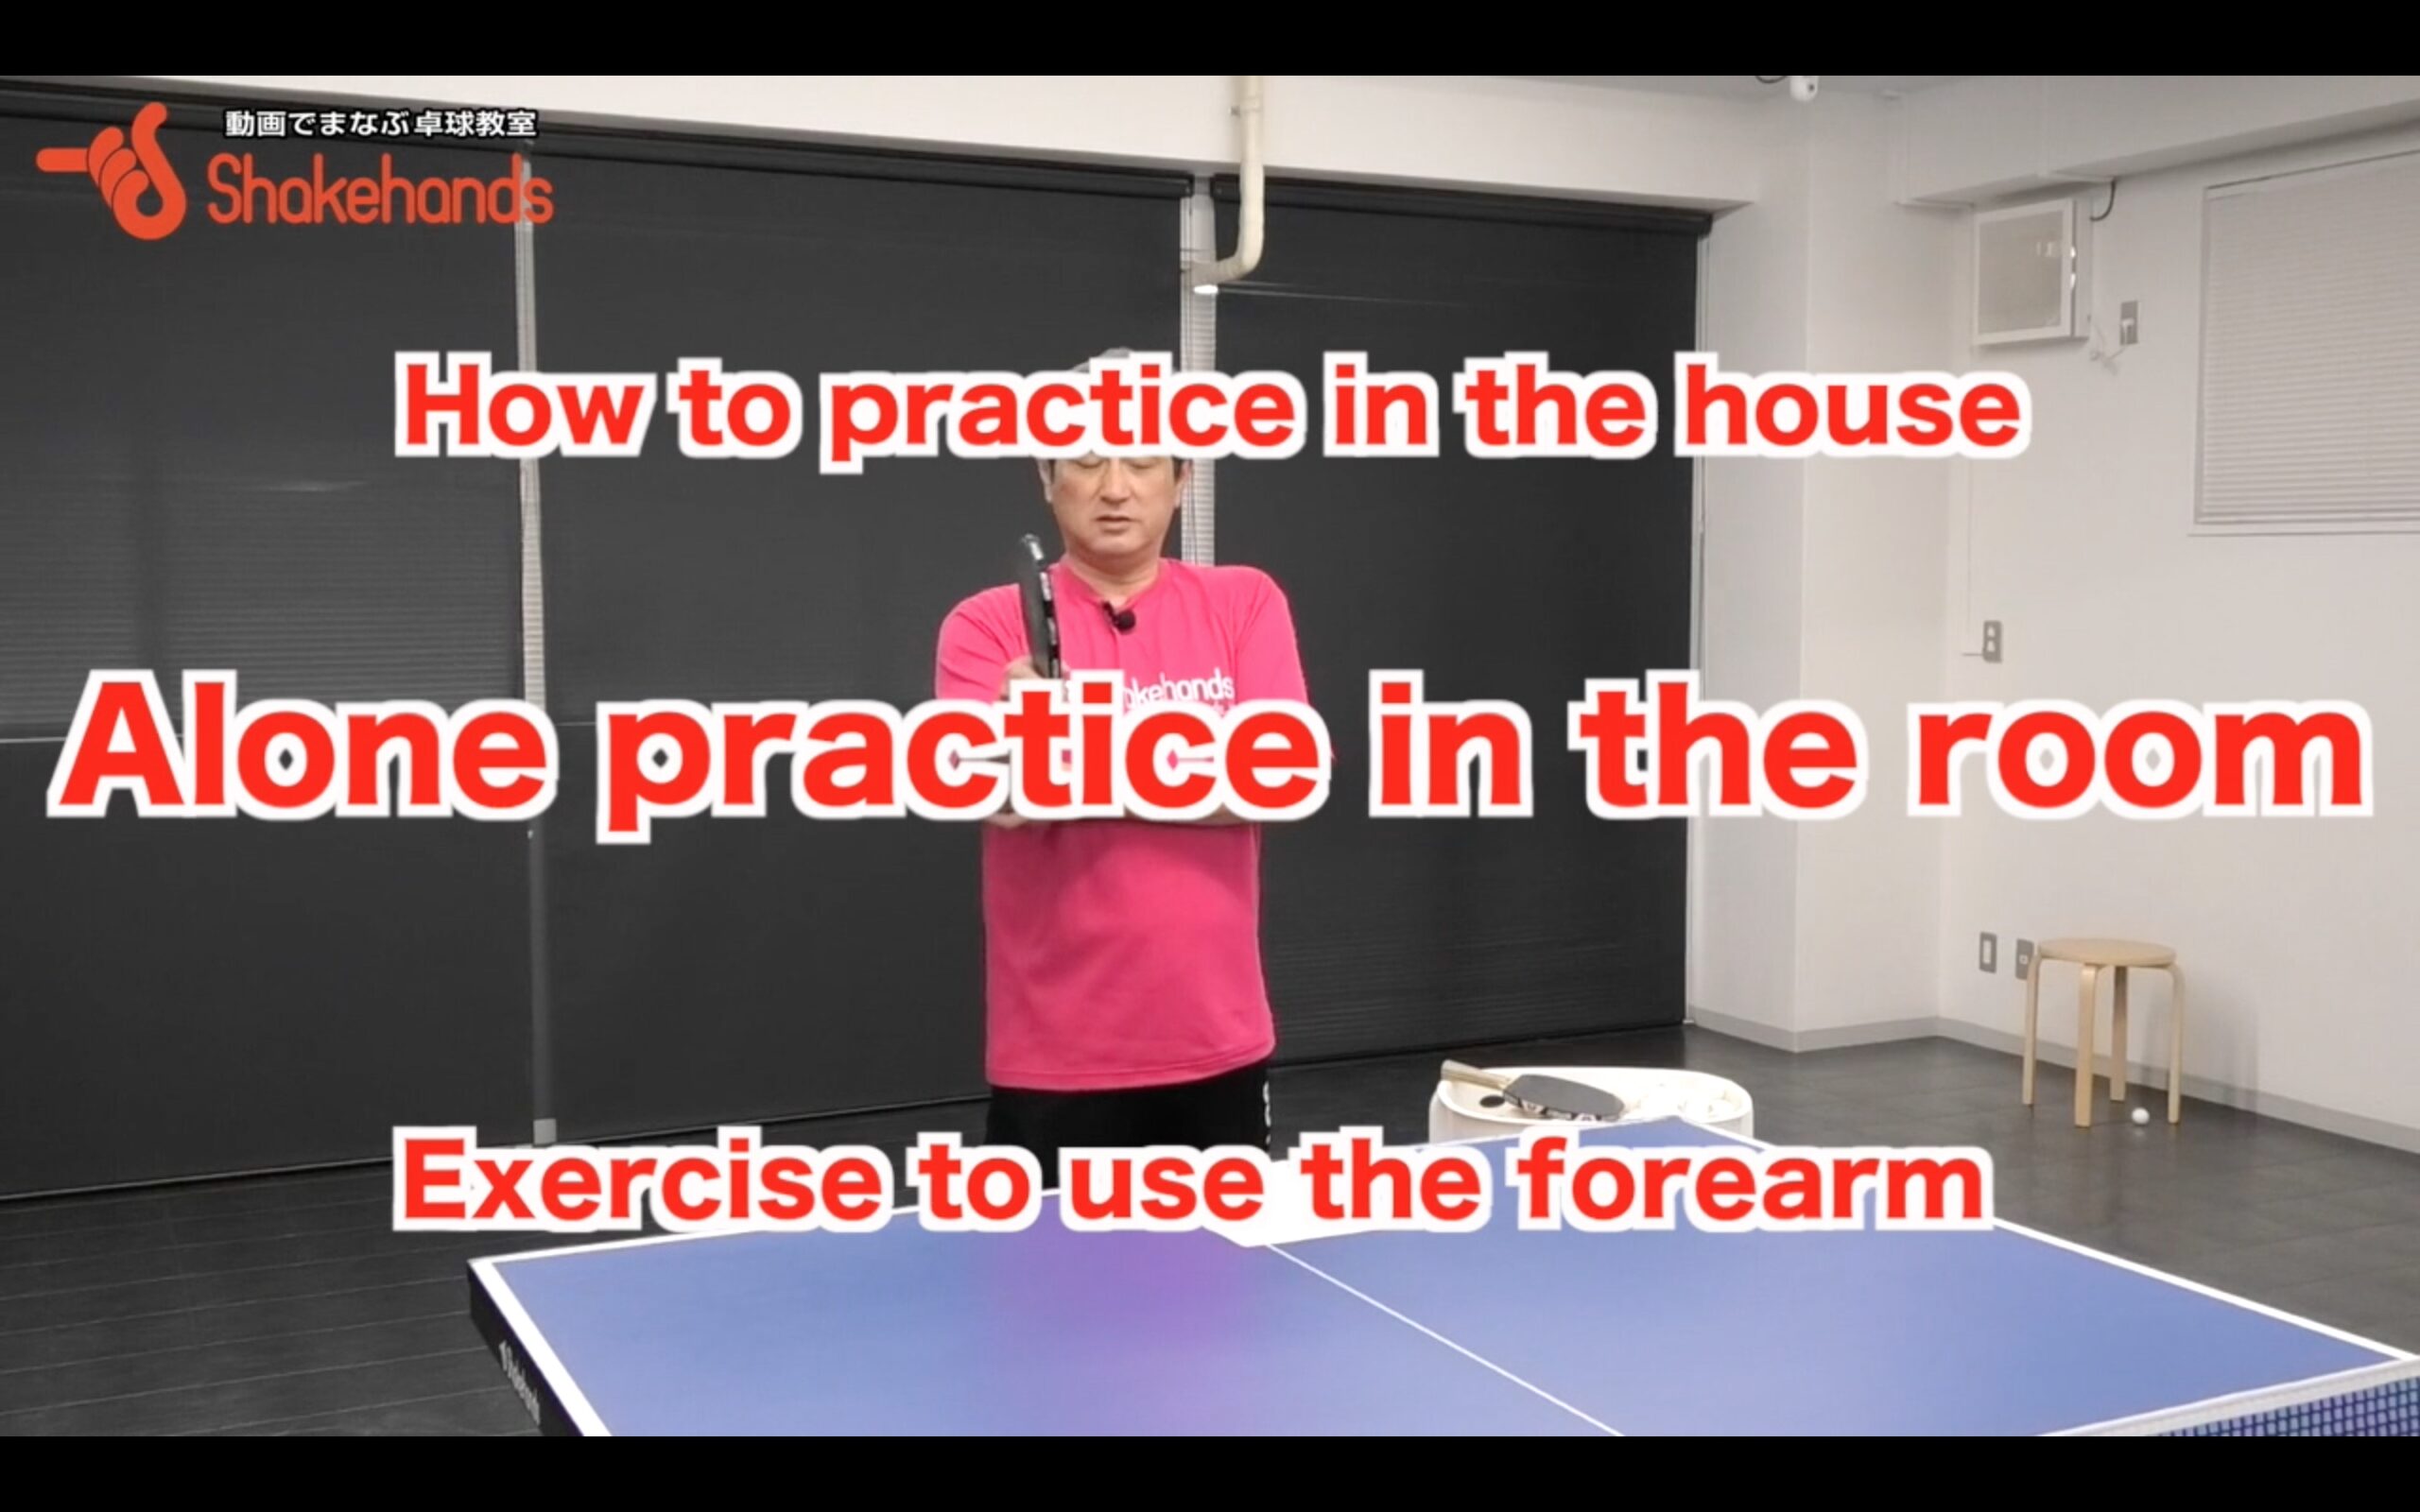 Exercise to use the forearm